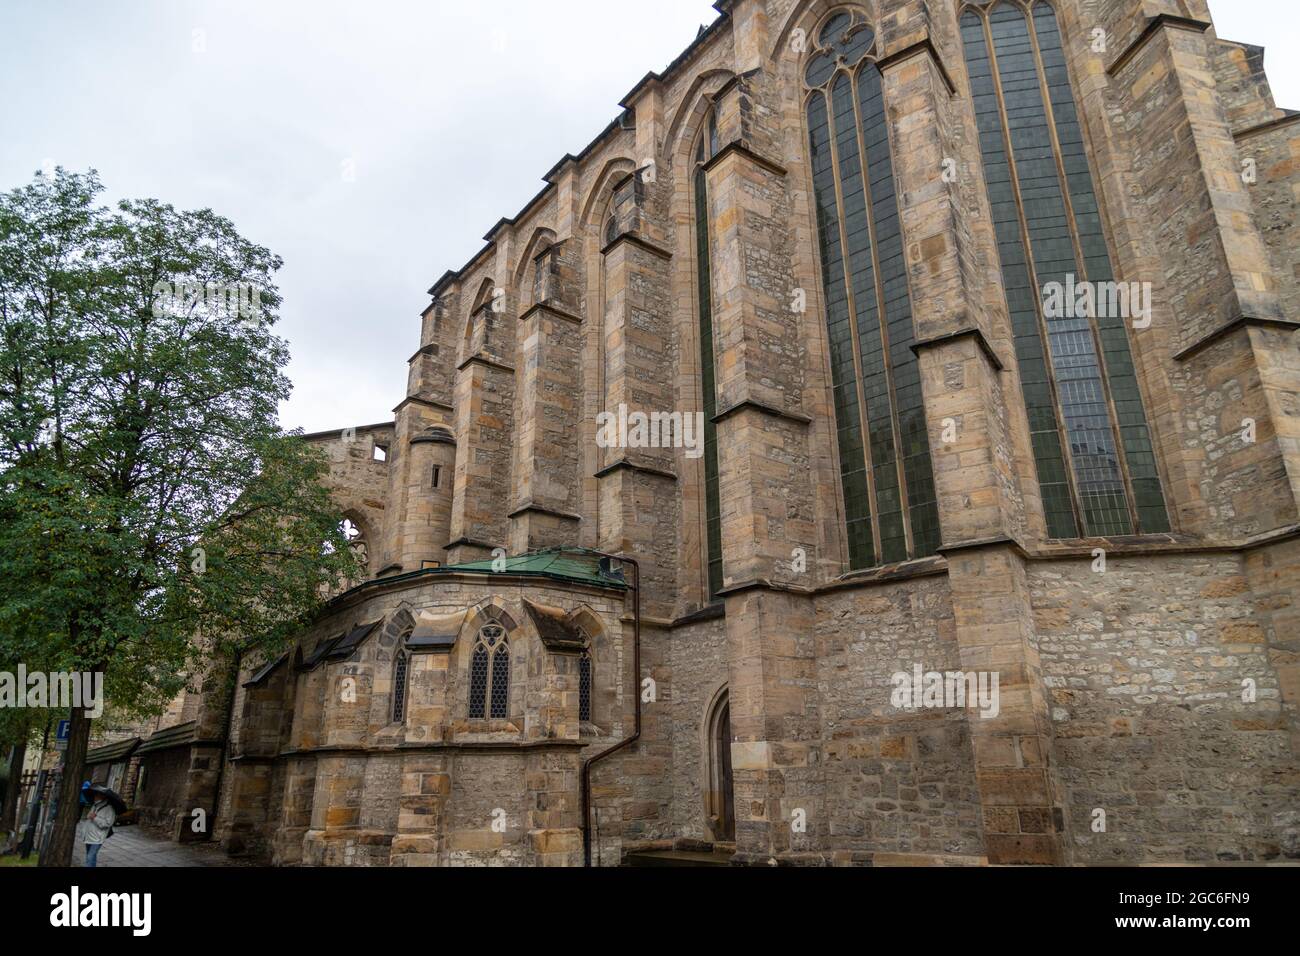 Wide angle view of the Barfüßer church in Erfurt, Thuringia Stock Photo